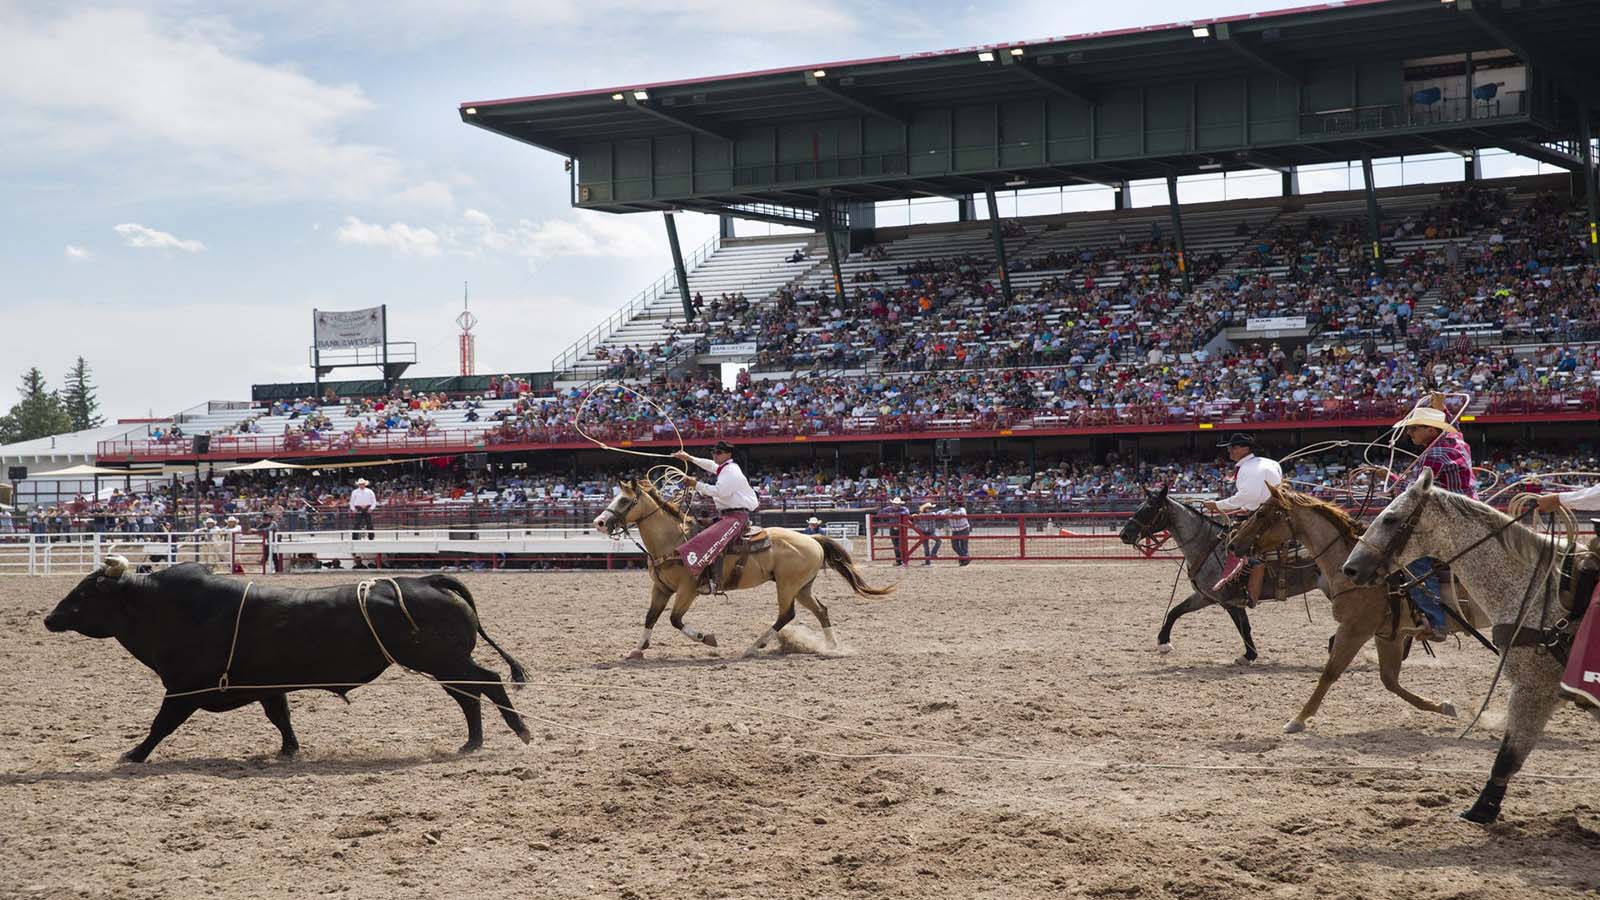 Are There Traditional Elements In Wyoming Rodeos?